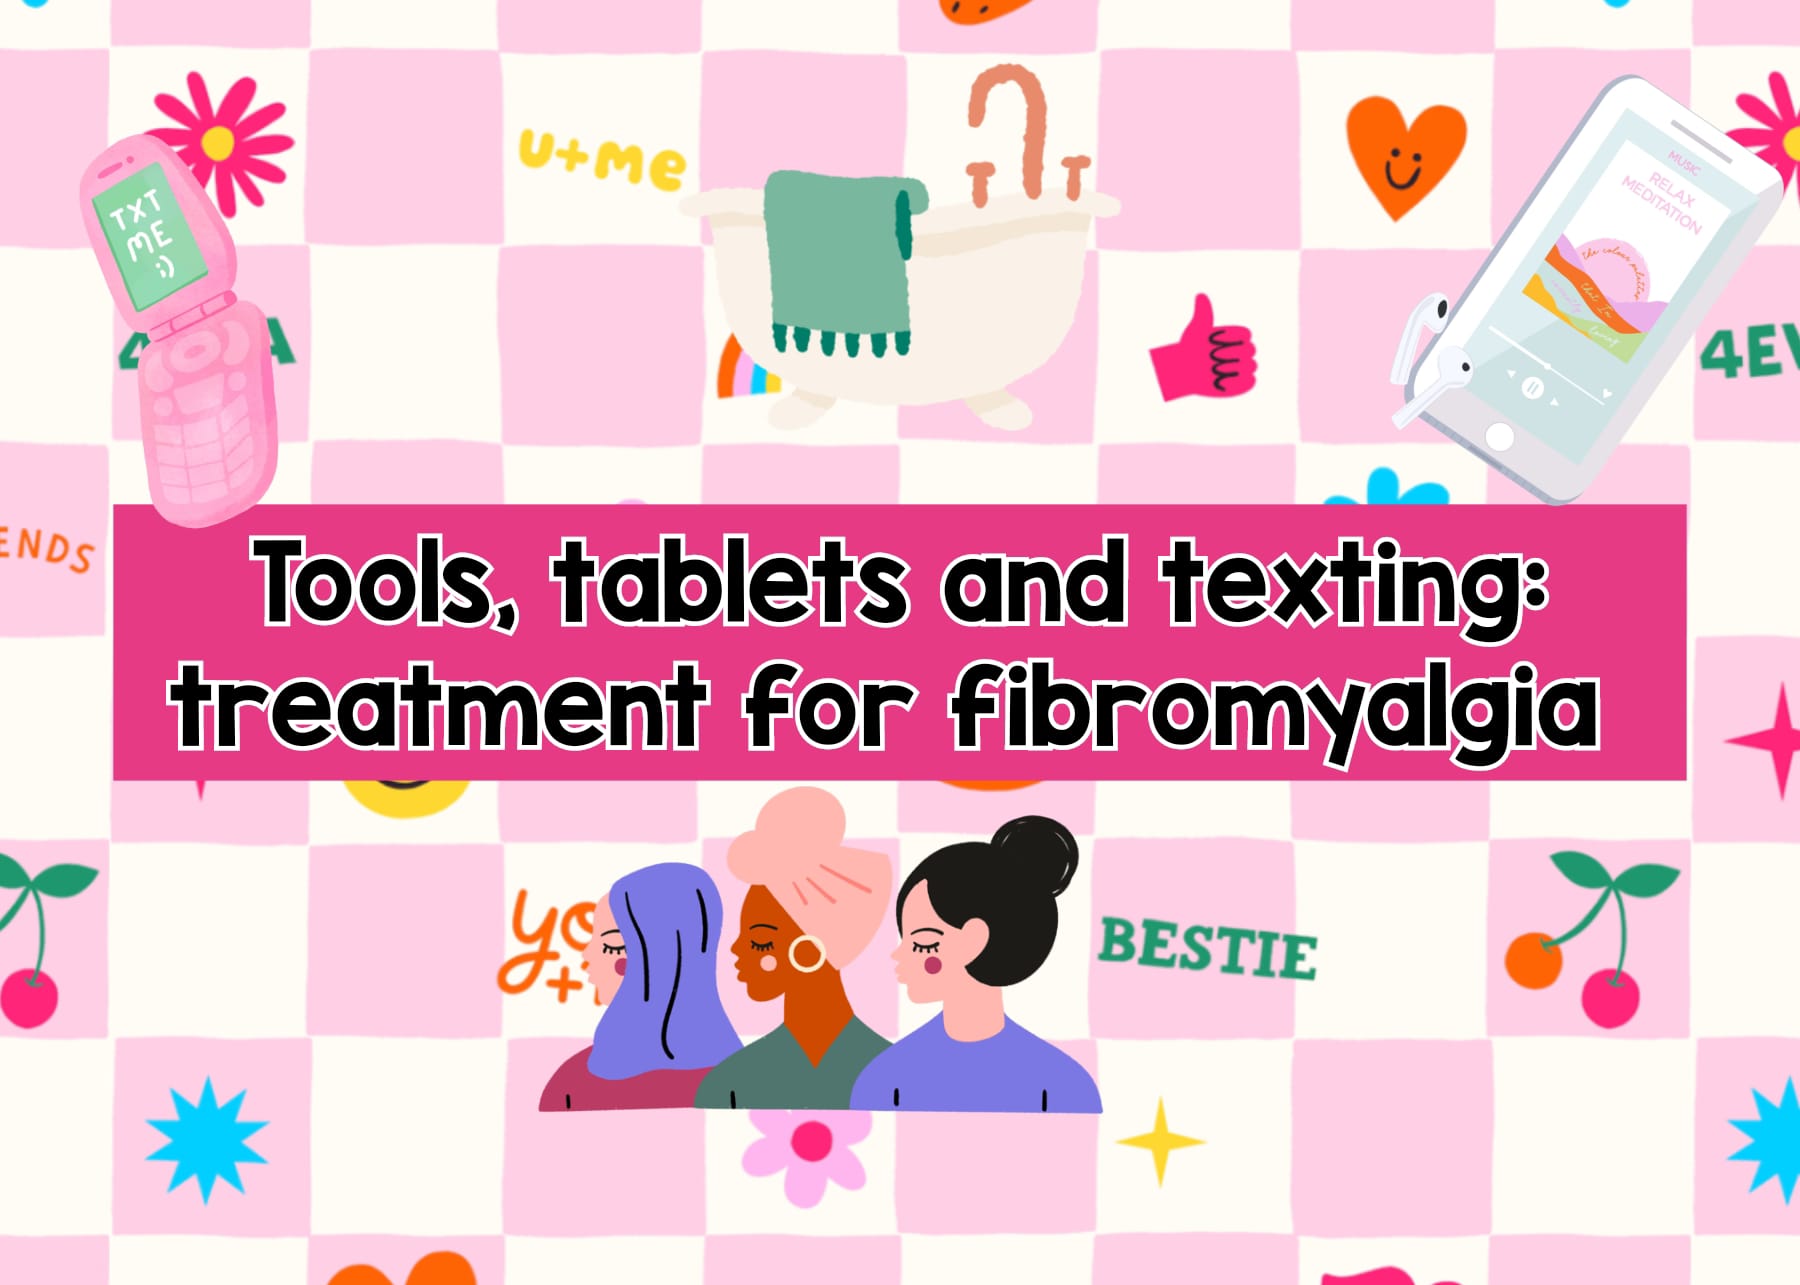 Tools, Tablets and Texting: Treatment for Fibromyalgia